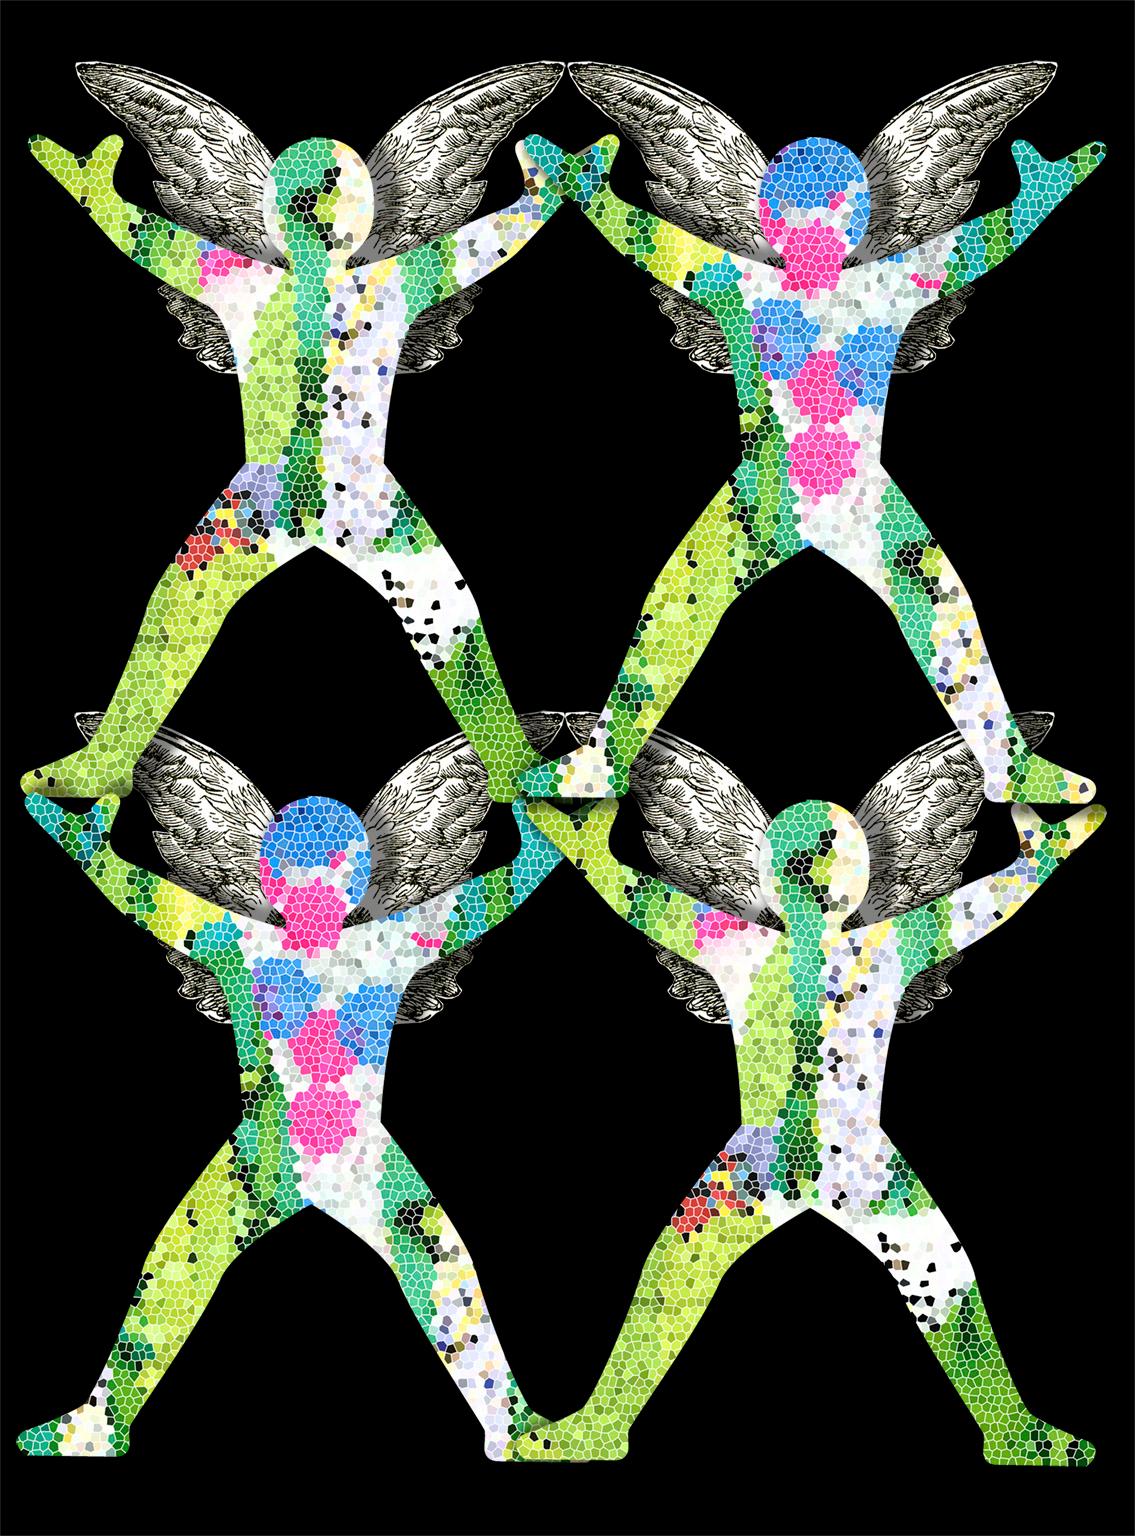 Rebecca Darlington Abstract Print - “Small Gems no. 10”, green and pink patterned, winged acrobats on a black ground